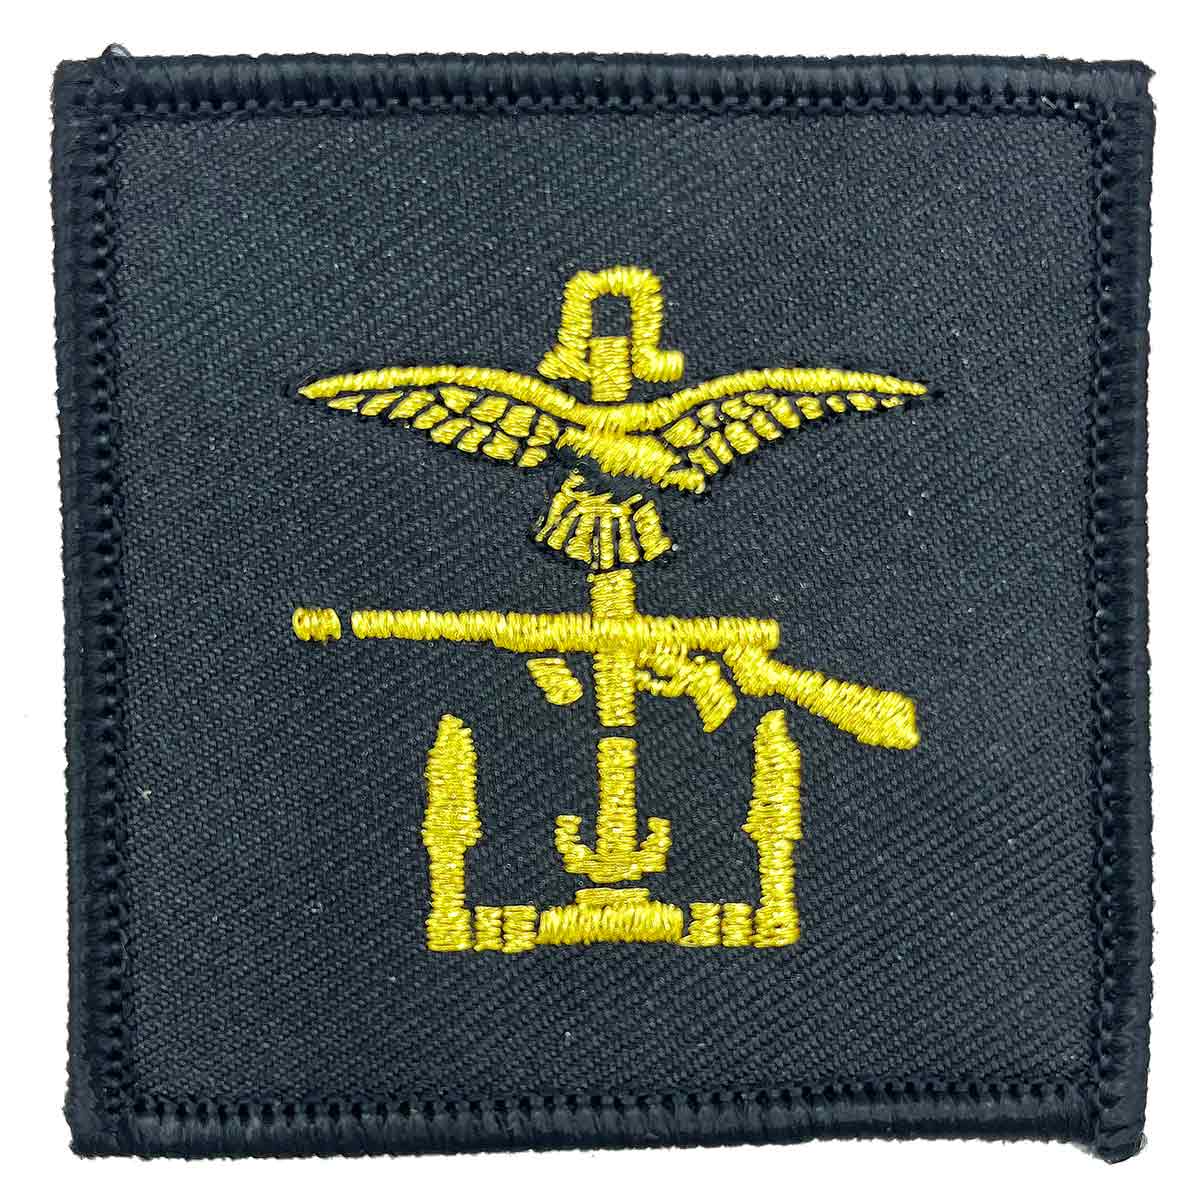 Joint Forces Command TRF - Sew on Patch - John Bull Clothing